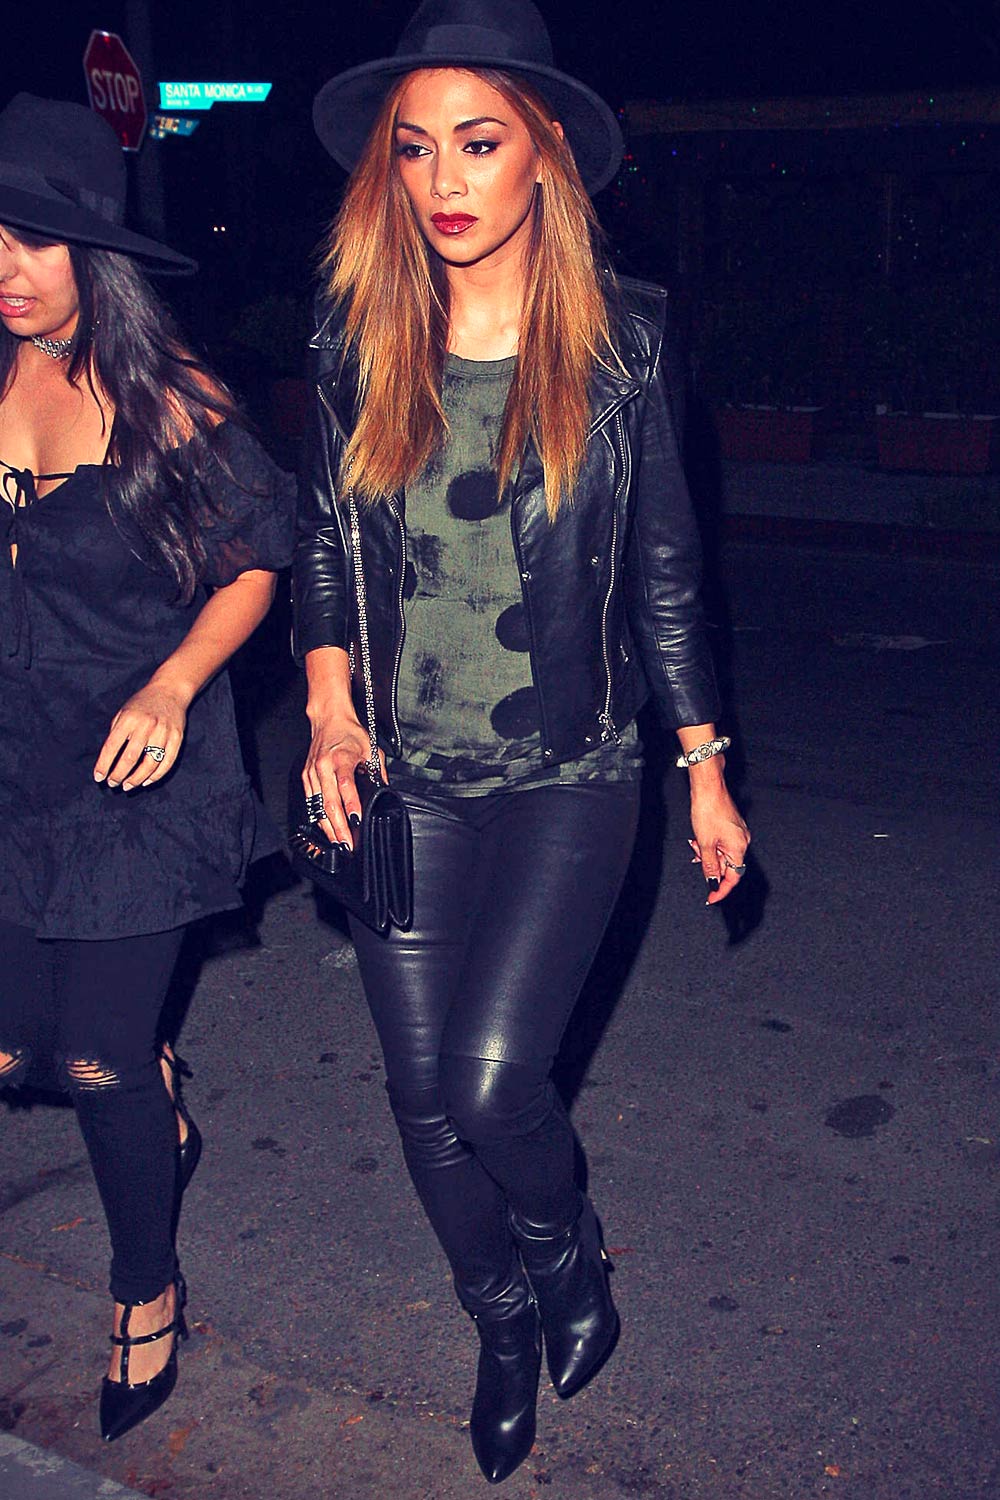 Nicole Scherzinger Leaves a Party with her friends